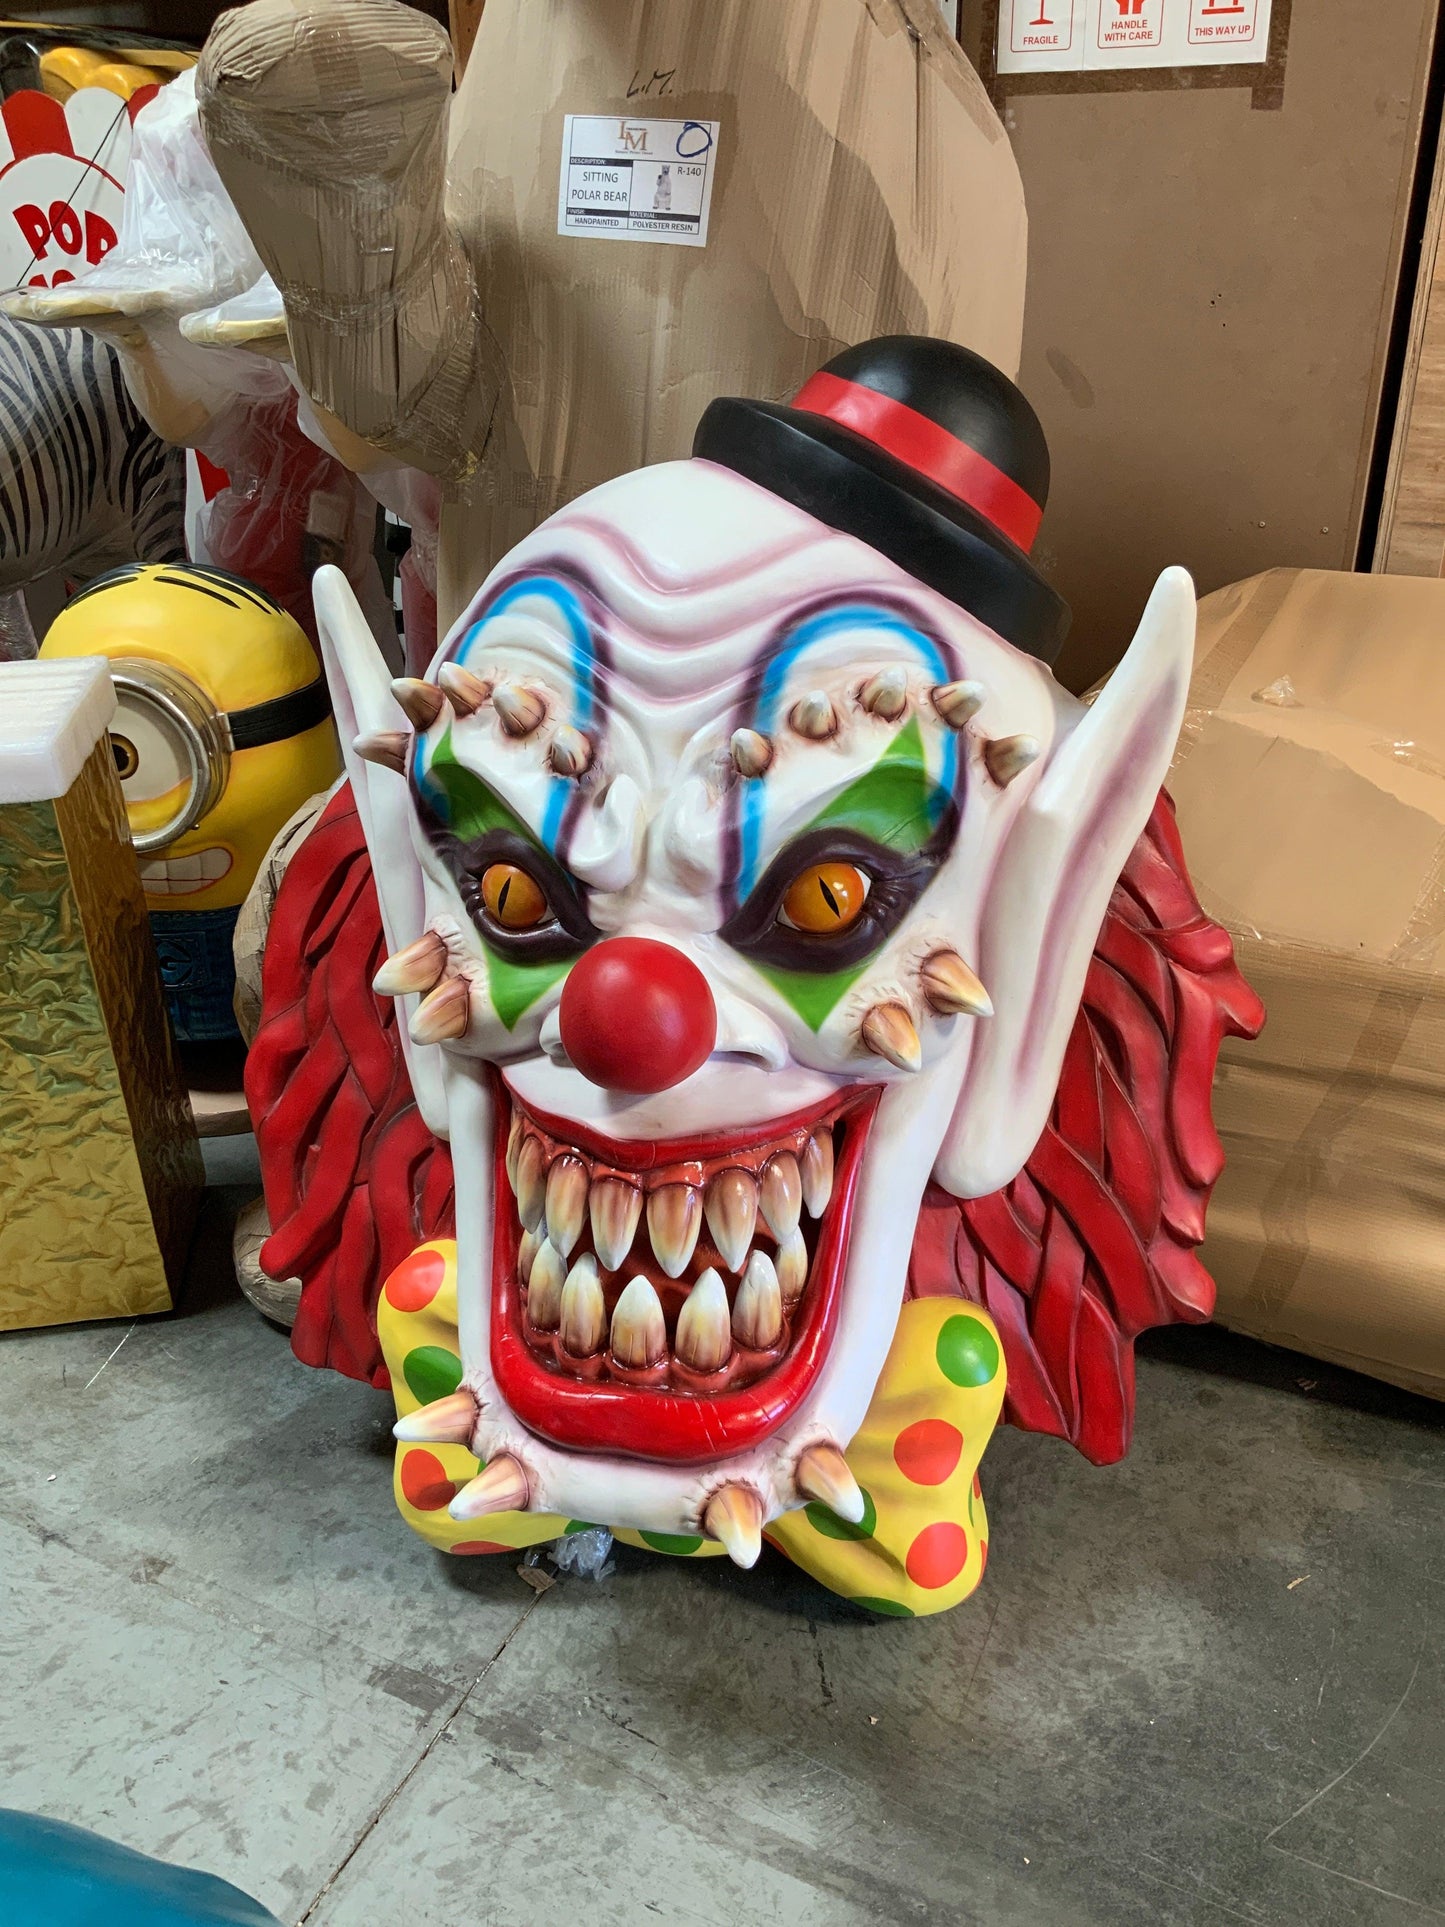 Scary Clown Head Wall Decor Over Sized Statue